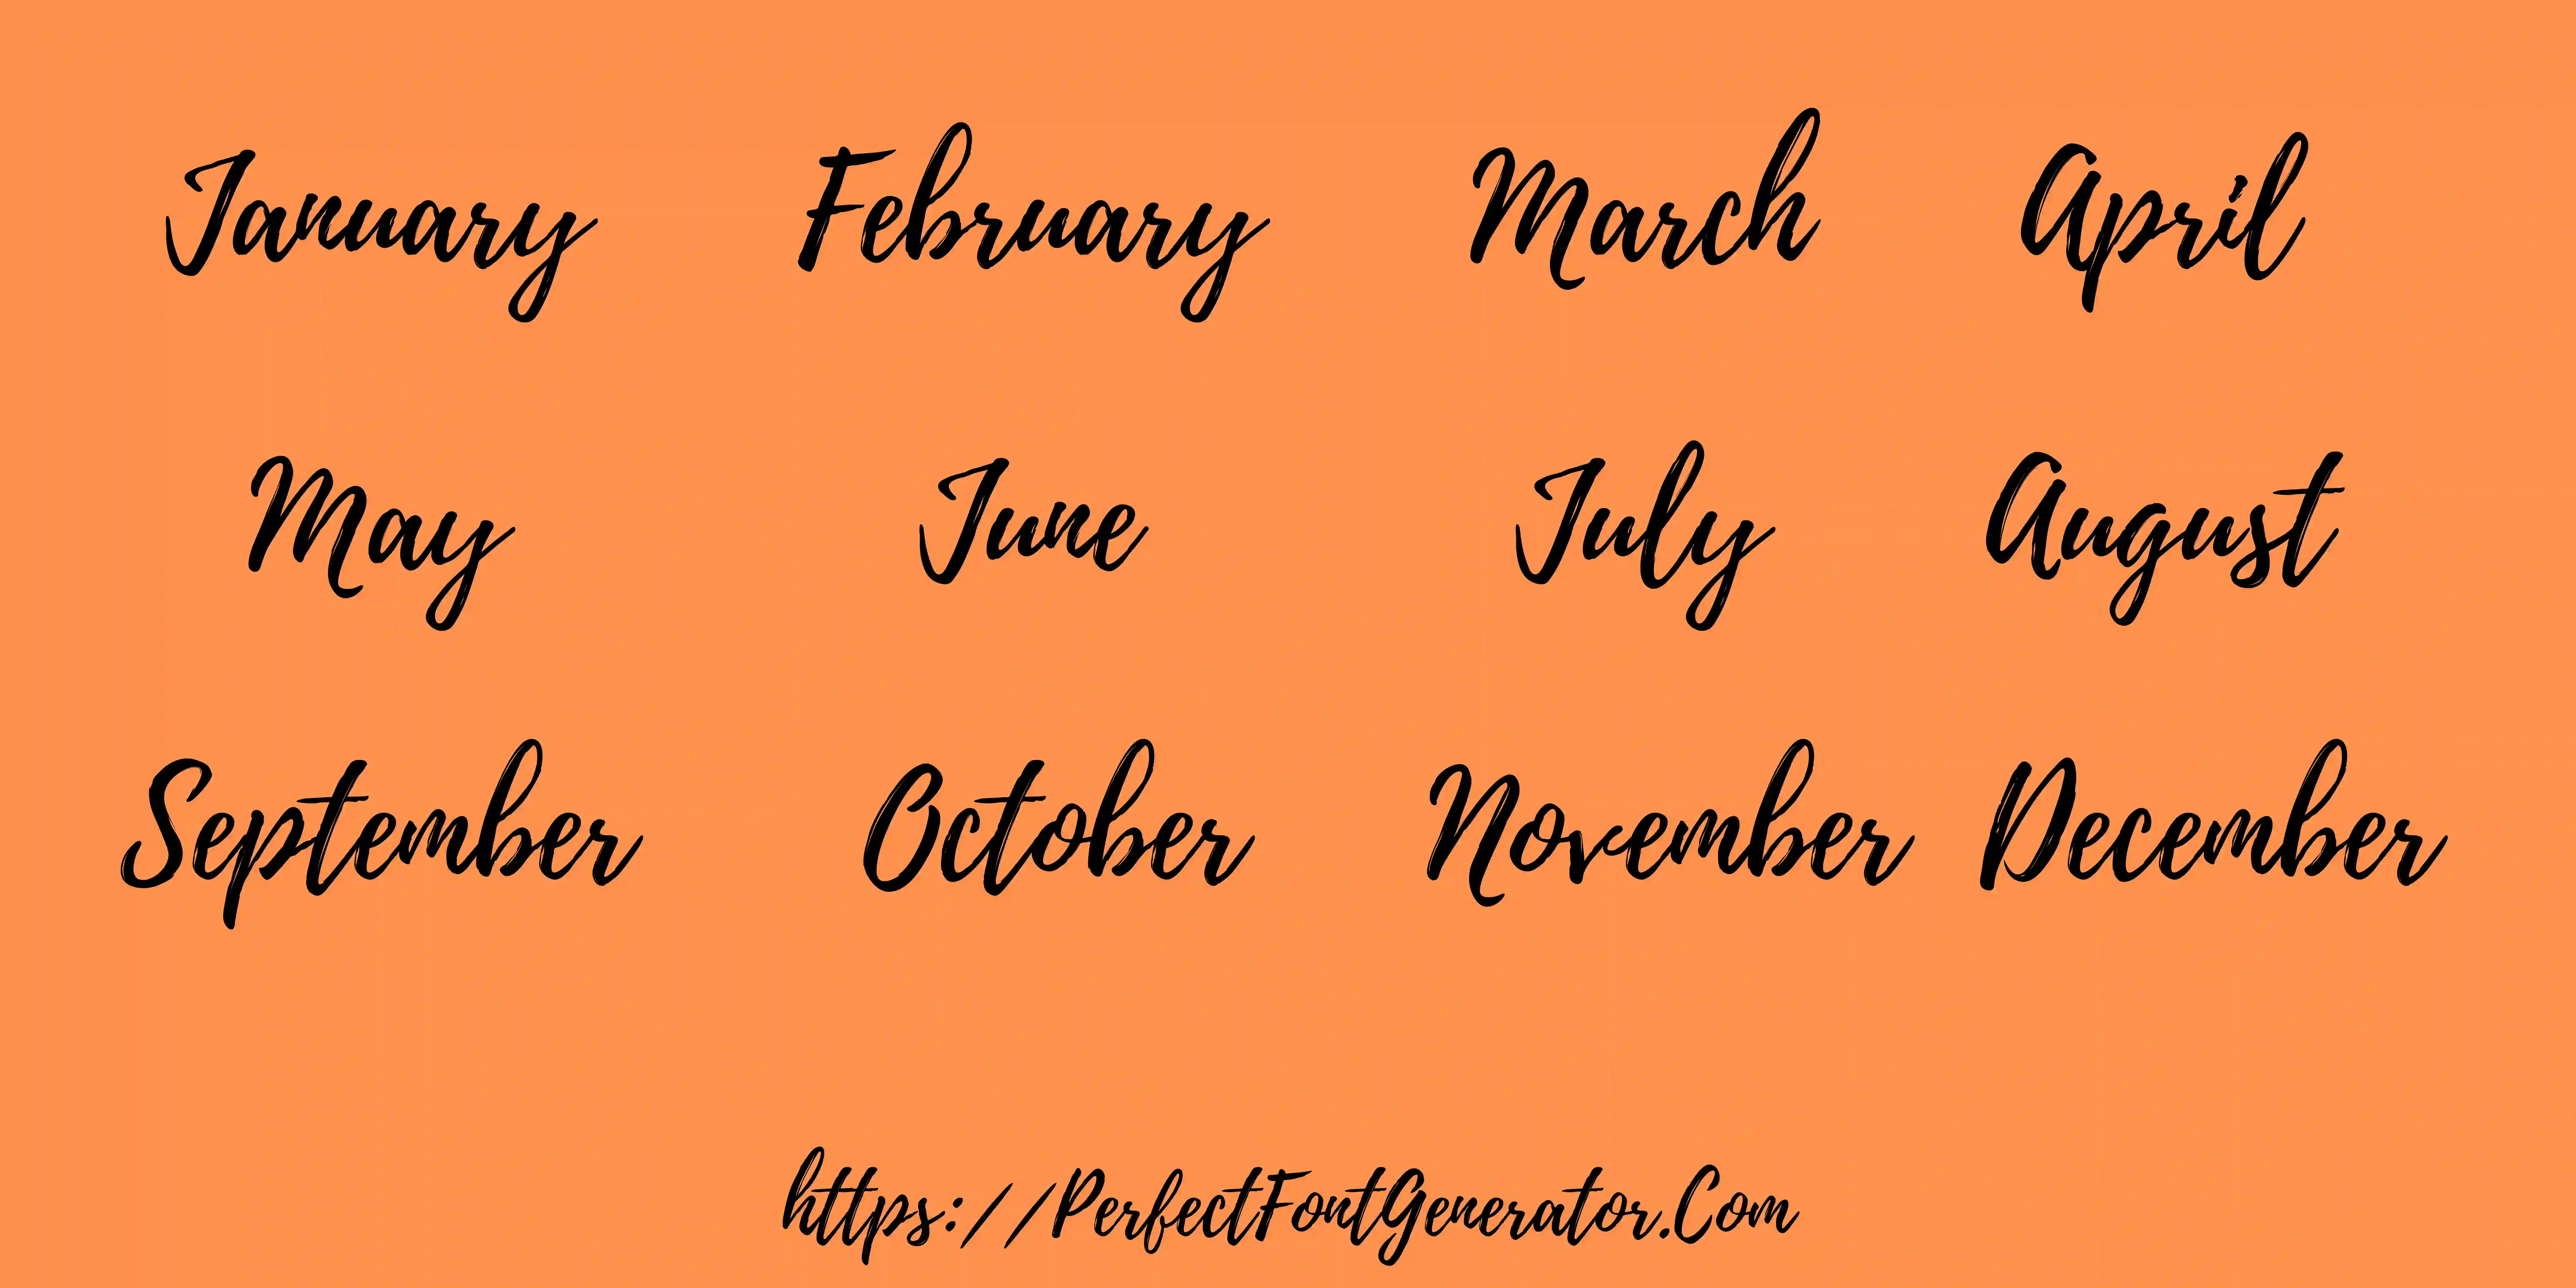 February in different fancy fonts